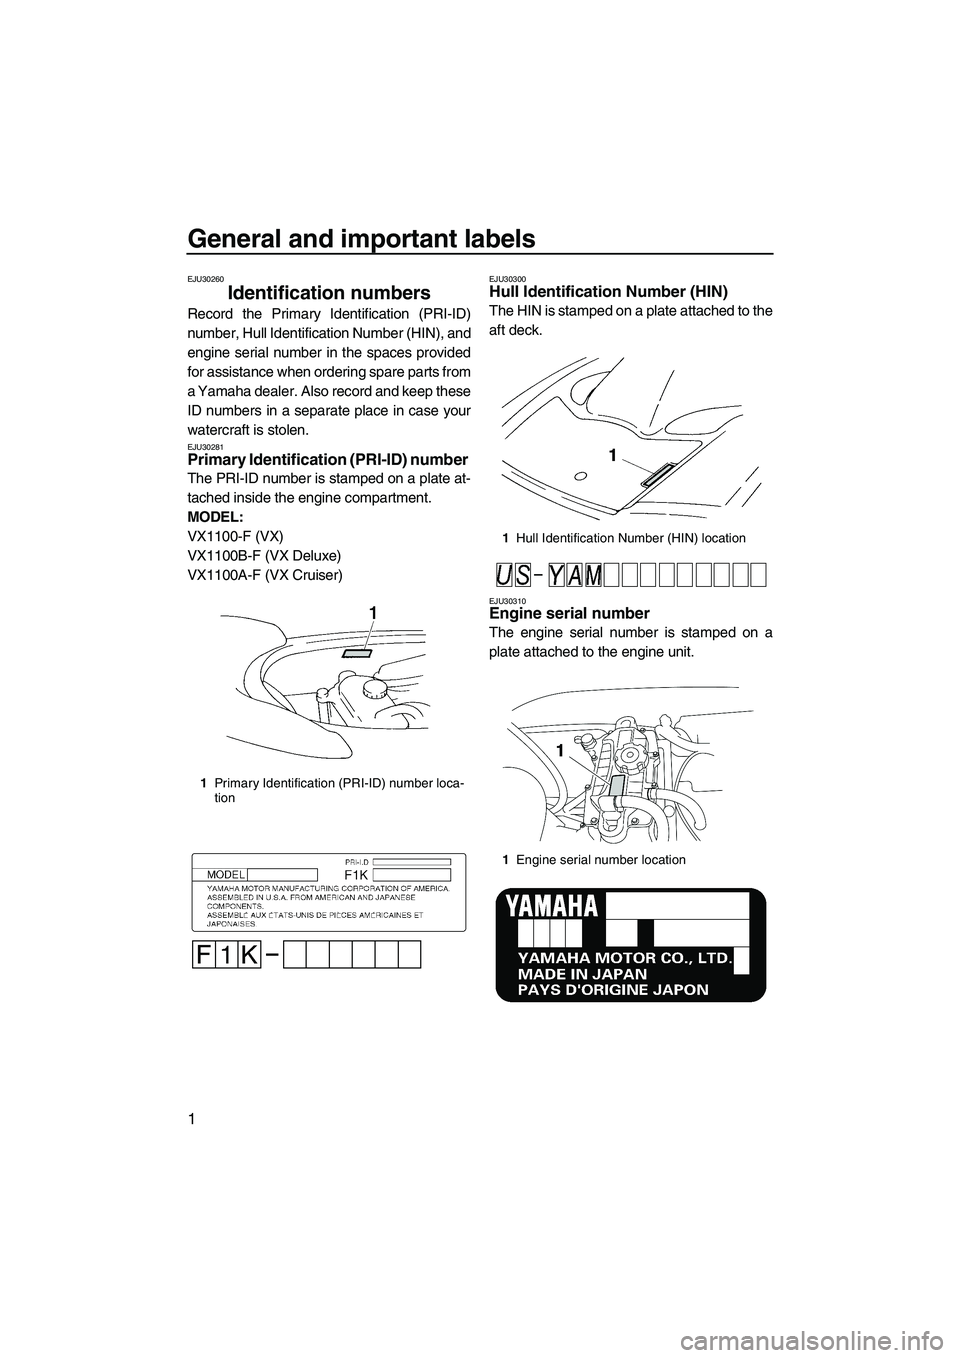 YAMAHA VX 2007  Owners Manual General and important labels
1
EJU30260
Identification numbers 
Record the Primary Identification (PRI-ID)
number, Hull Identification Number (HIN), and
engine serial number in the spaces provided
for